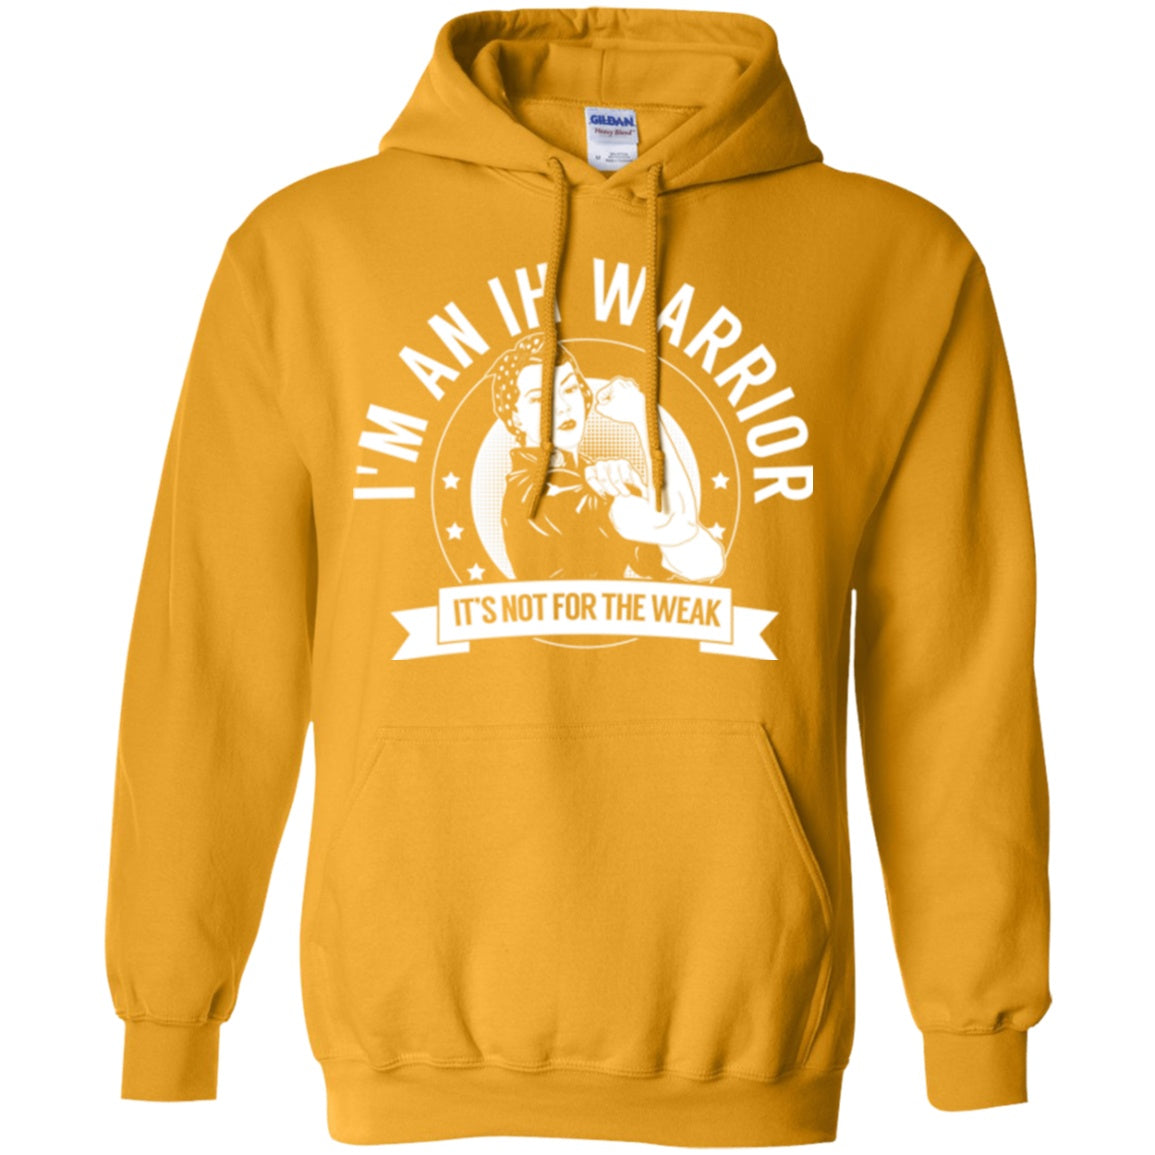 Idiopathic Hypersomnia - IH Warrior Not For The Weak Pullover Hoodie 8 oz. - The Unchargeables